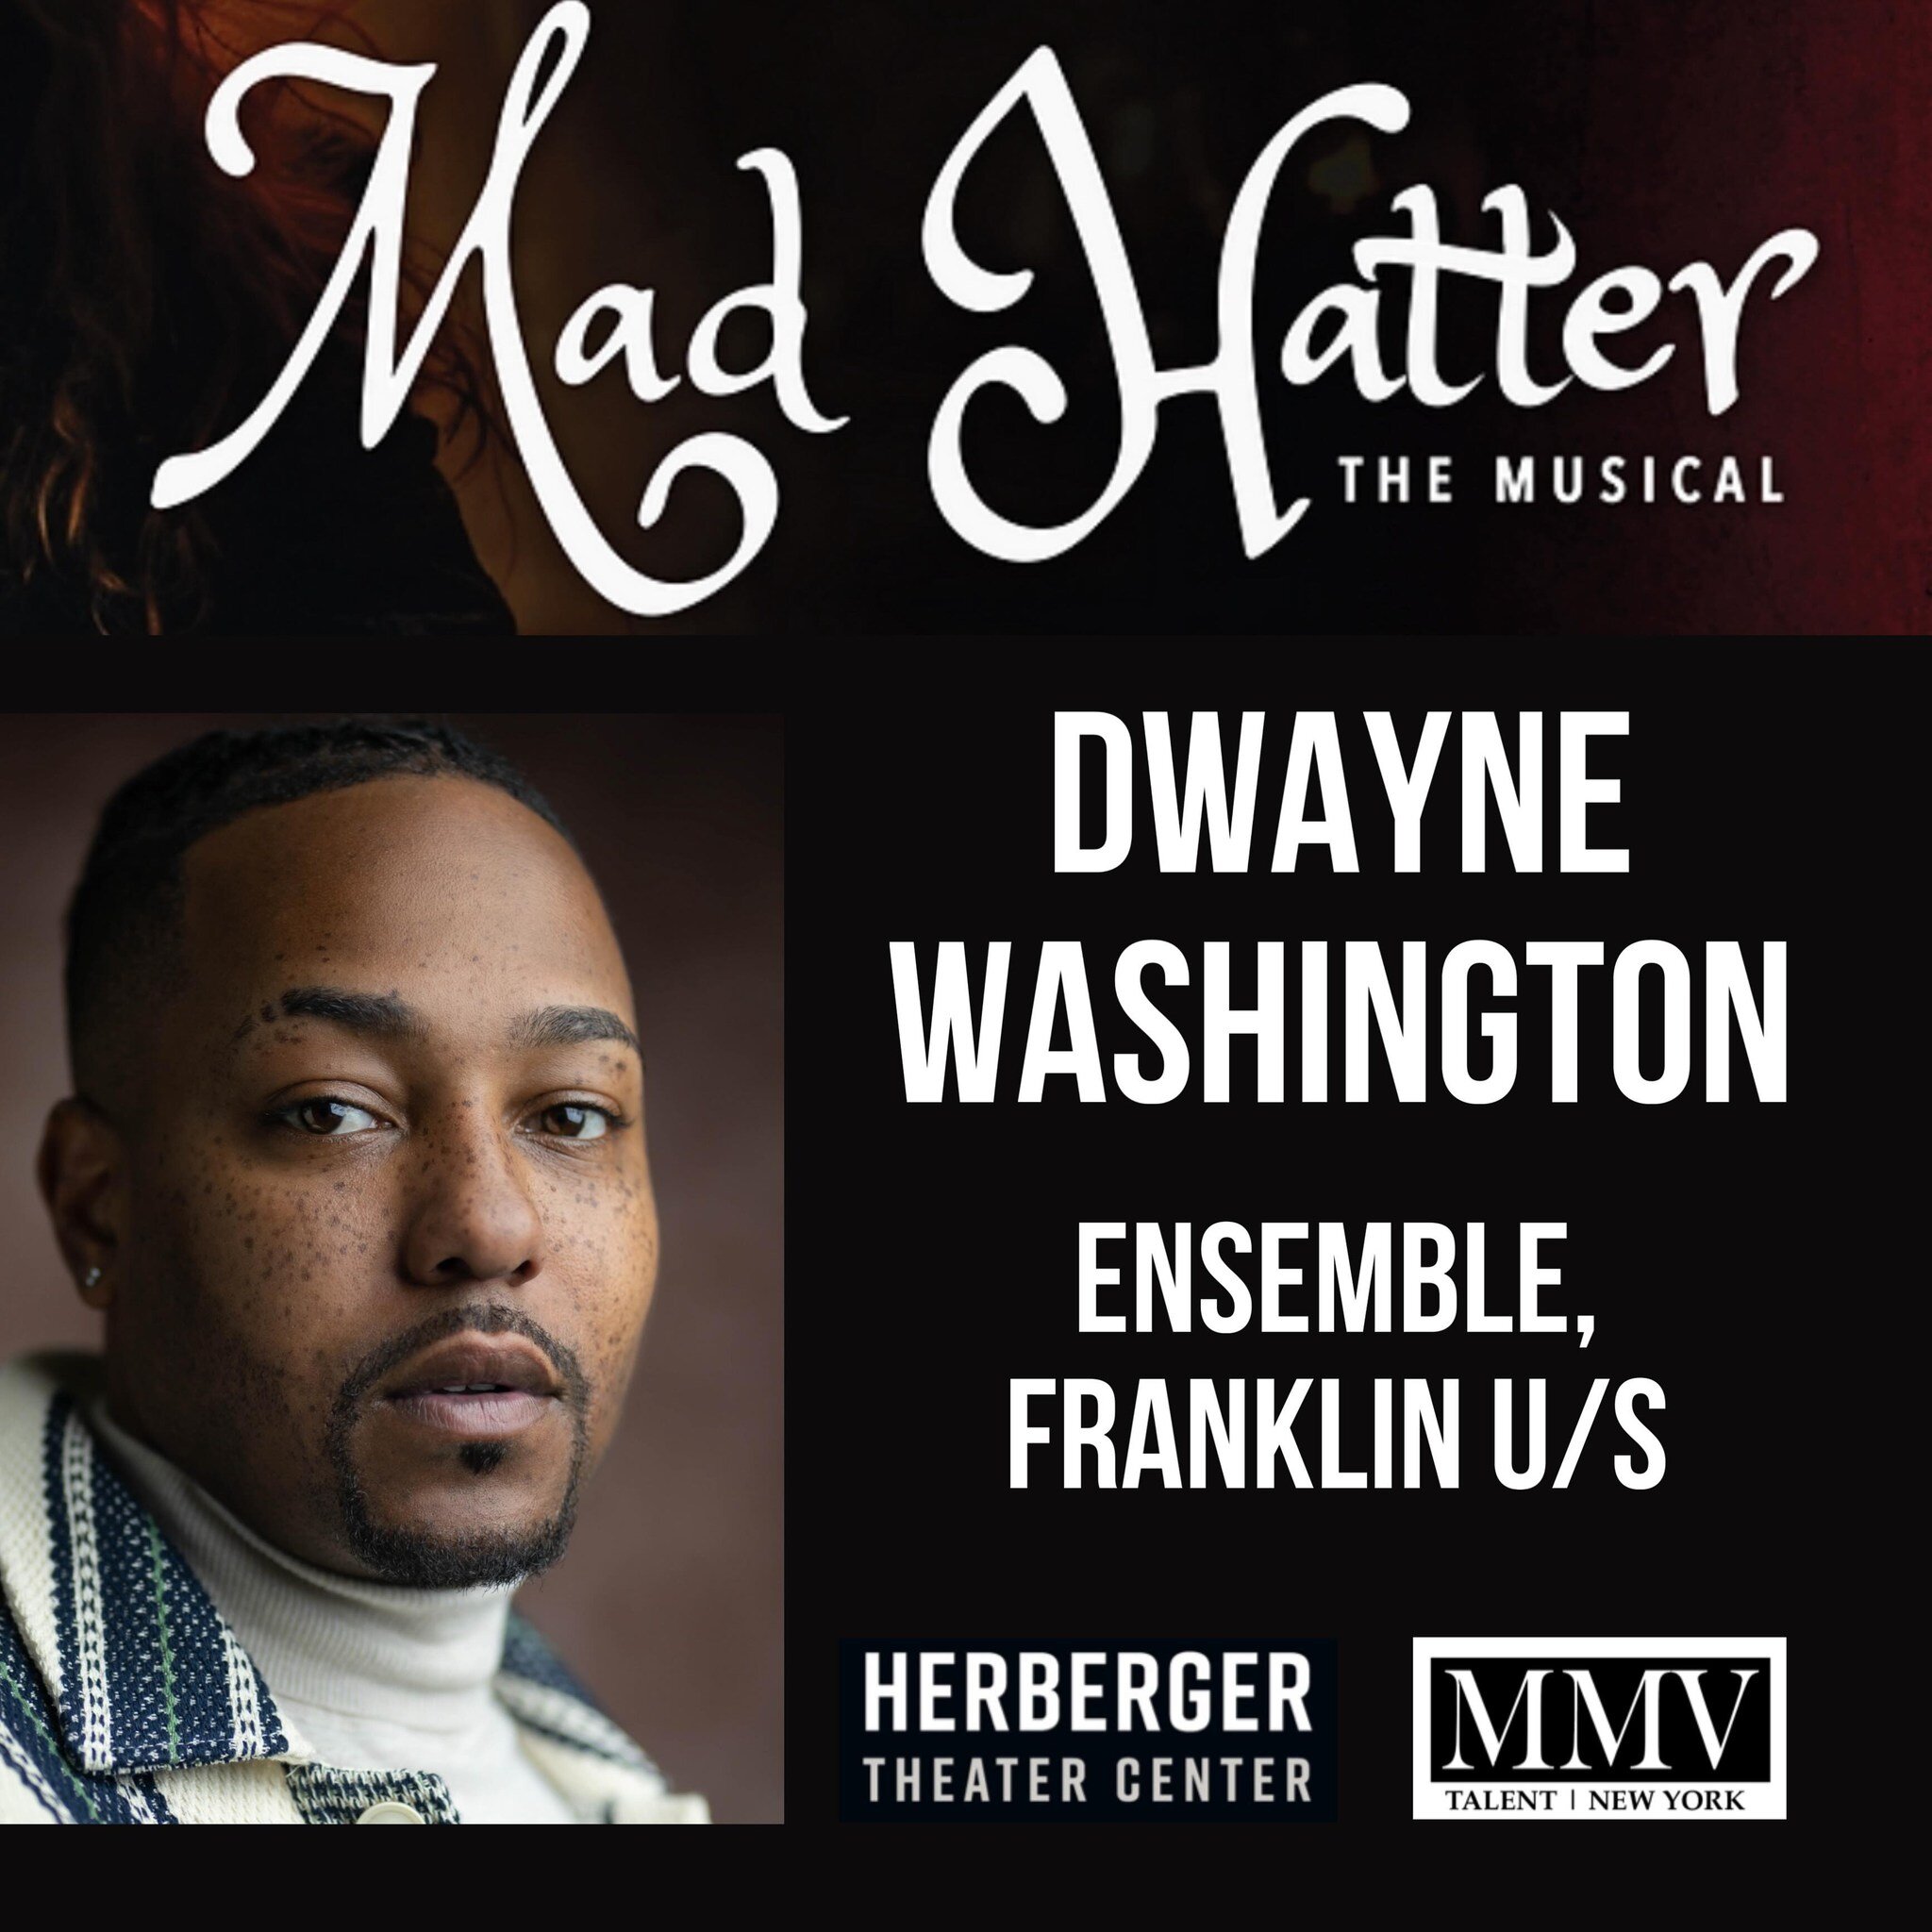 DWAYNE WASHINGTON will be heading to Phoenix for a world premiere musical, The Mad Hatter.🤩

@dwaynesvoice #mmvtalent